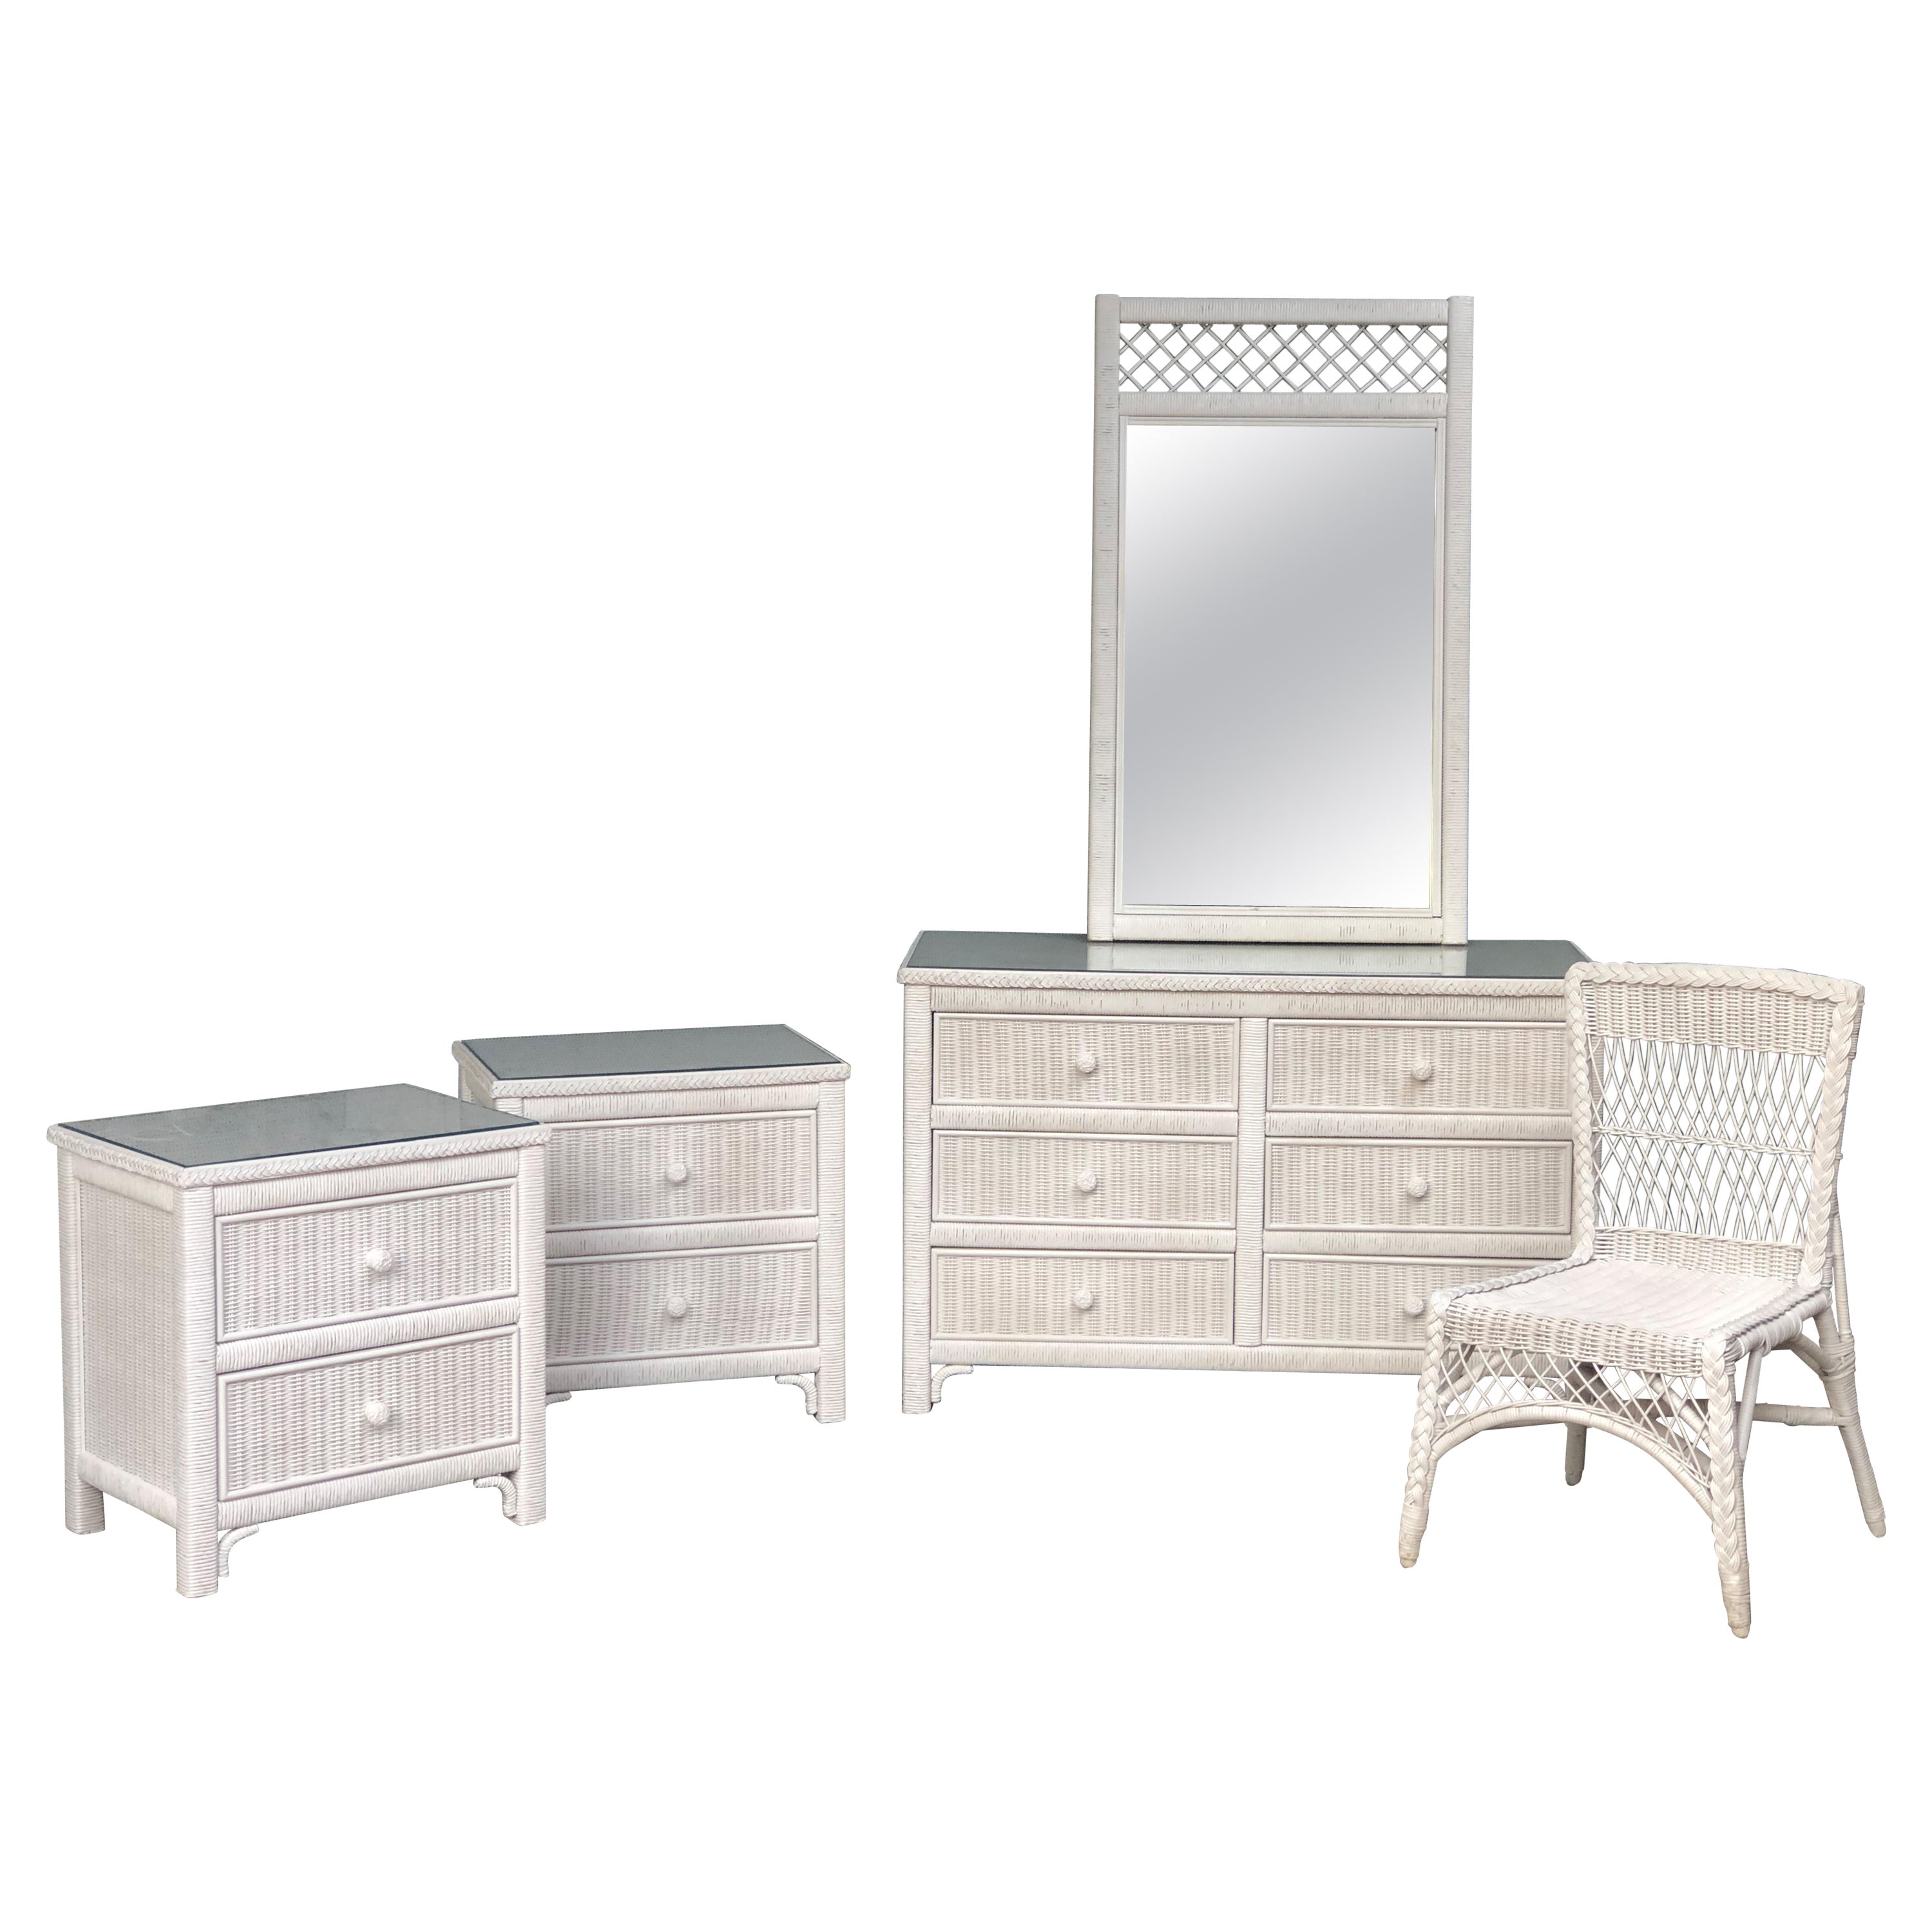 Rare set of white wicker Henry Link Bedroom Furniture, including Nightstands x 2, Chest of Drawers,
Wall Mirror and chair.  Solid wood structure, with woven wicker. 

Set comprises of:
- 2 x 2 Drawer Bedside Tables / Nightstands
- 6 Drawer Chest of